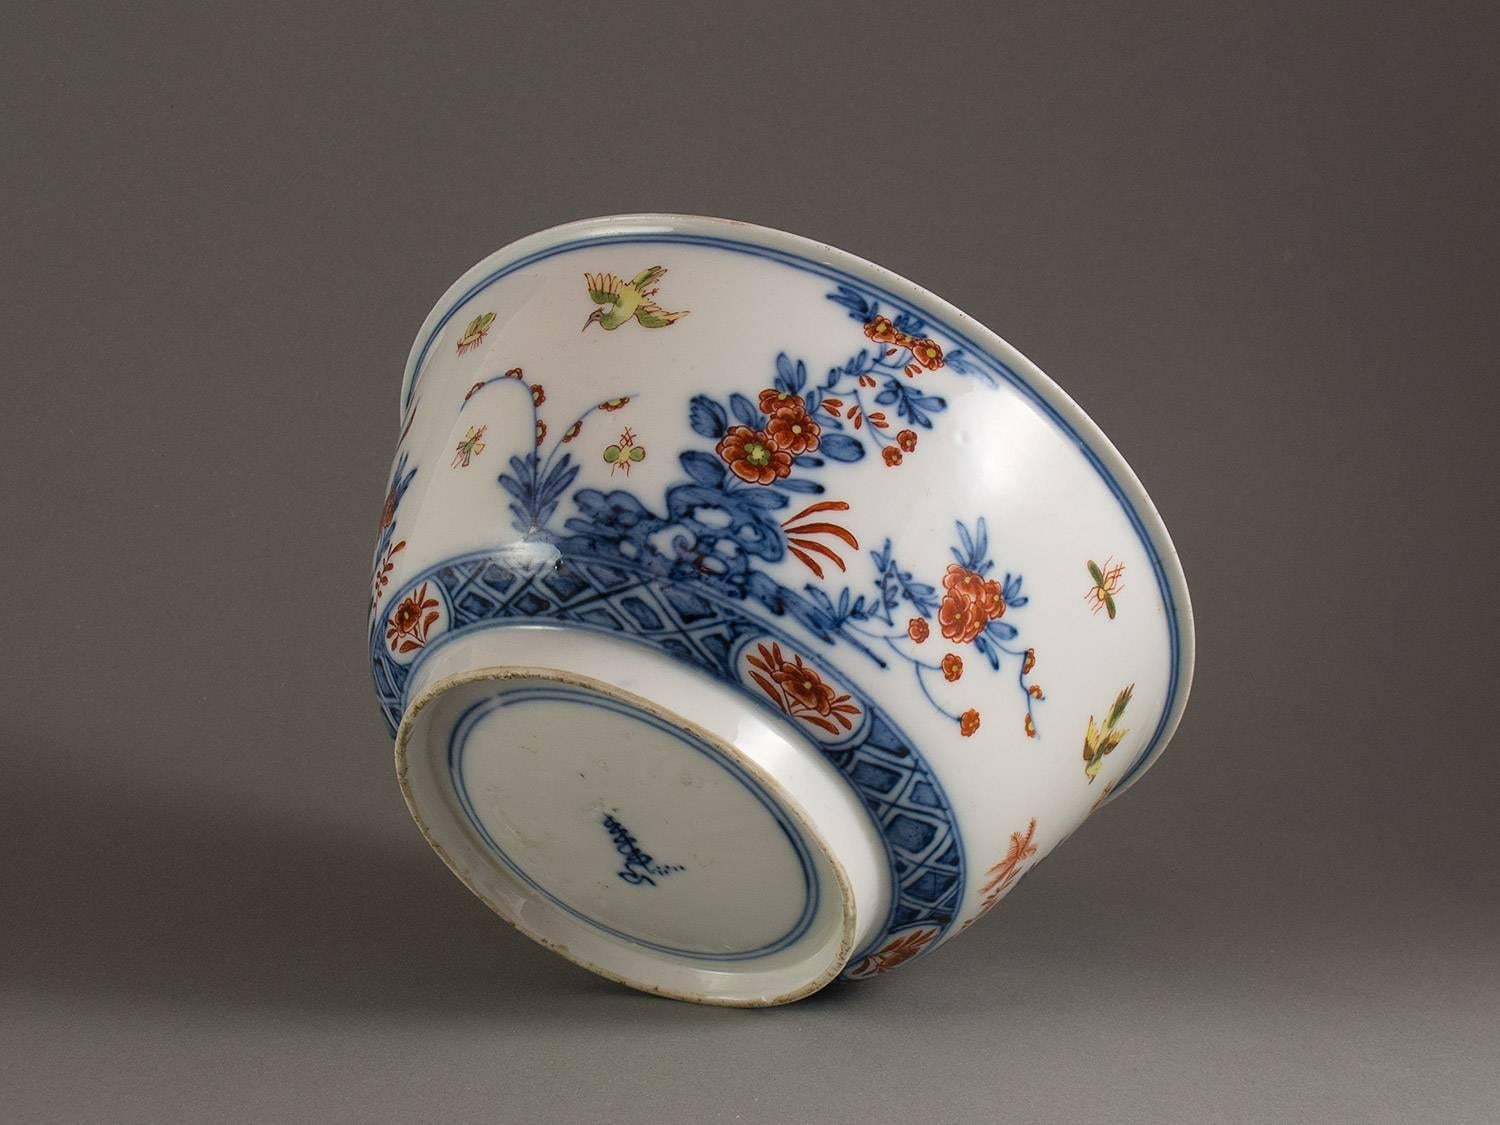 Painted in underglaze blue and enamel colors by Johann C. Horn
Early Dragon-mark in underglaze blue on the bottom
Early Böttger porcelain with small dots of fly ash

The bowl belongs to the group of early Meissen porcelains, in which from the